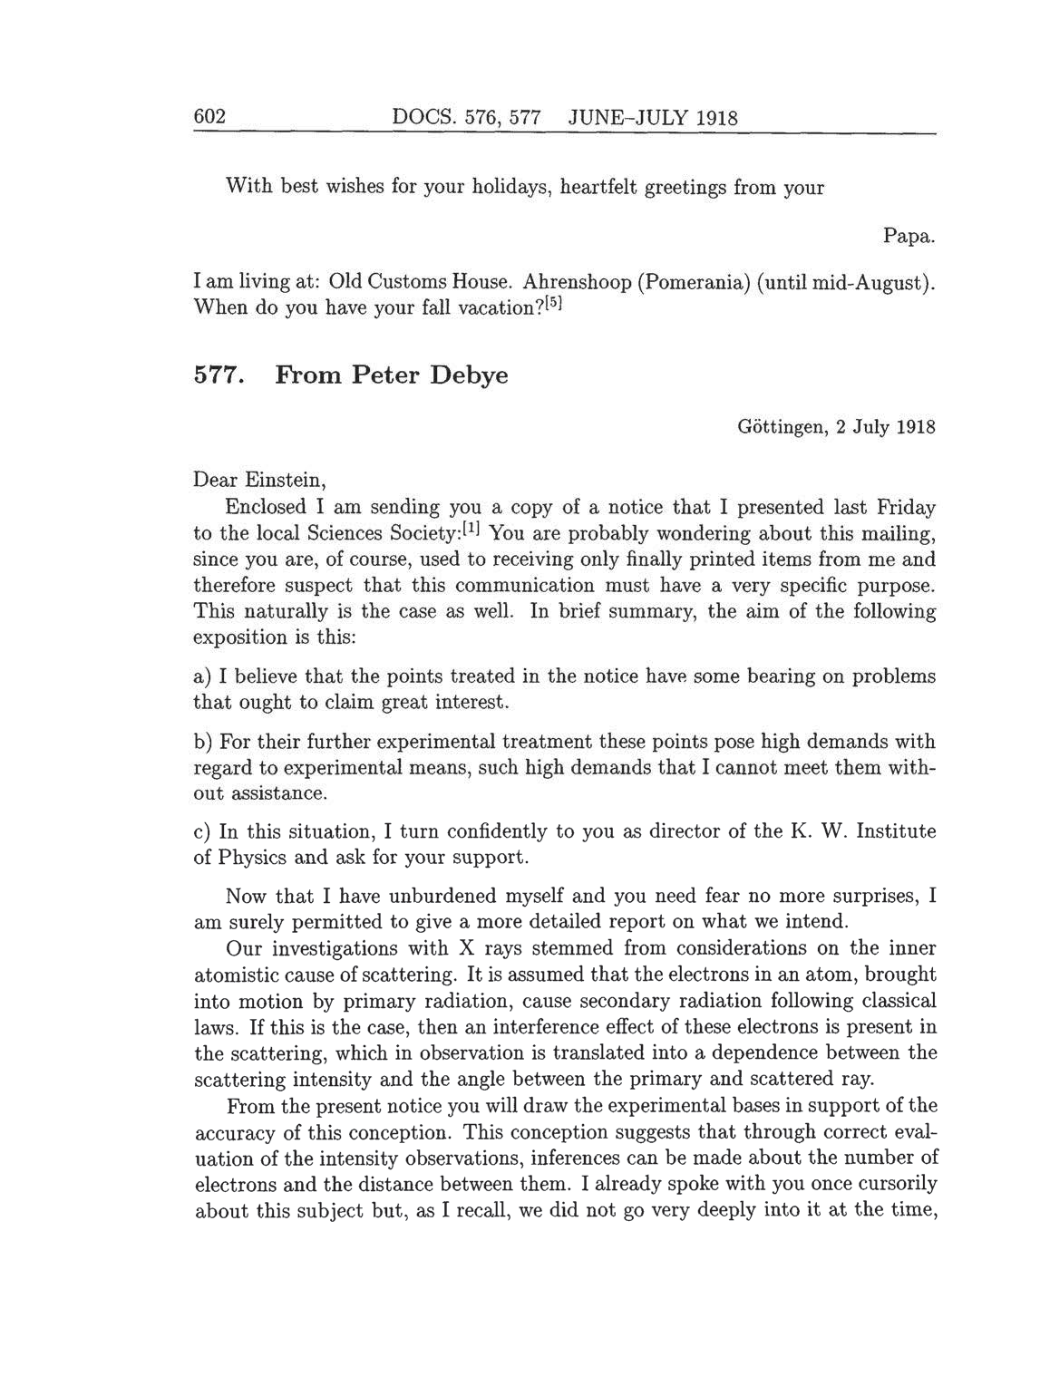 Volume 8: The Berlin Years: Correspondence, 1914-1918 (English translation supplement) page 602